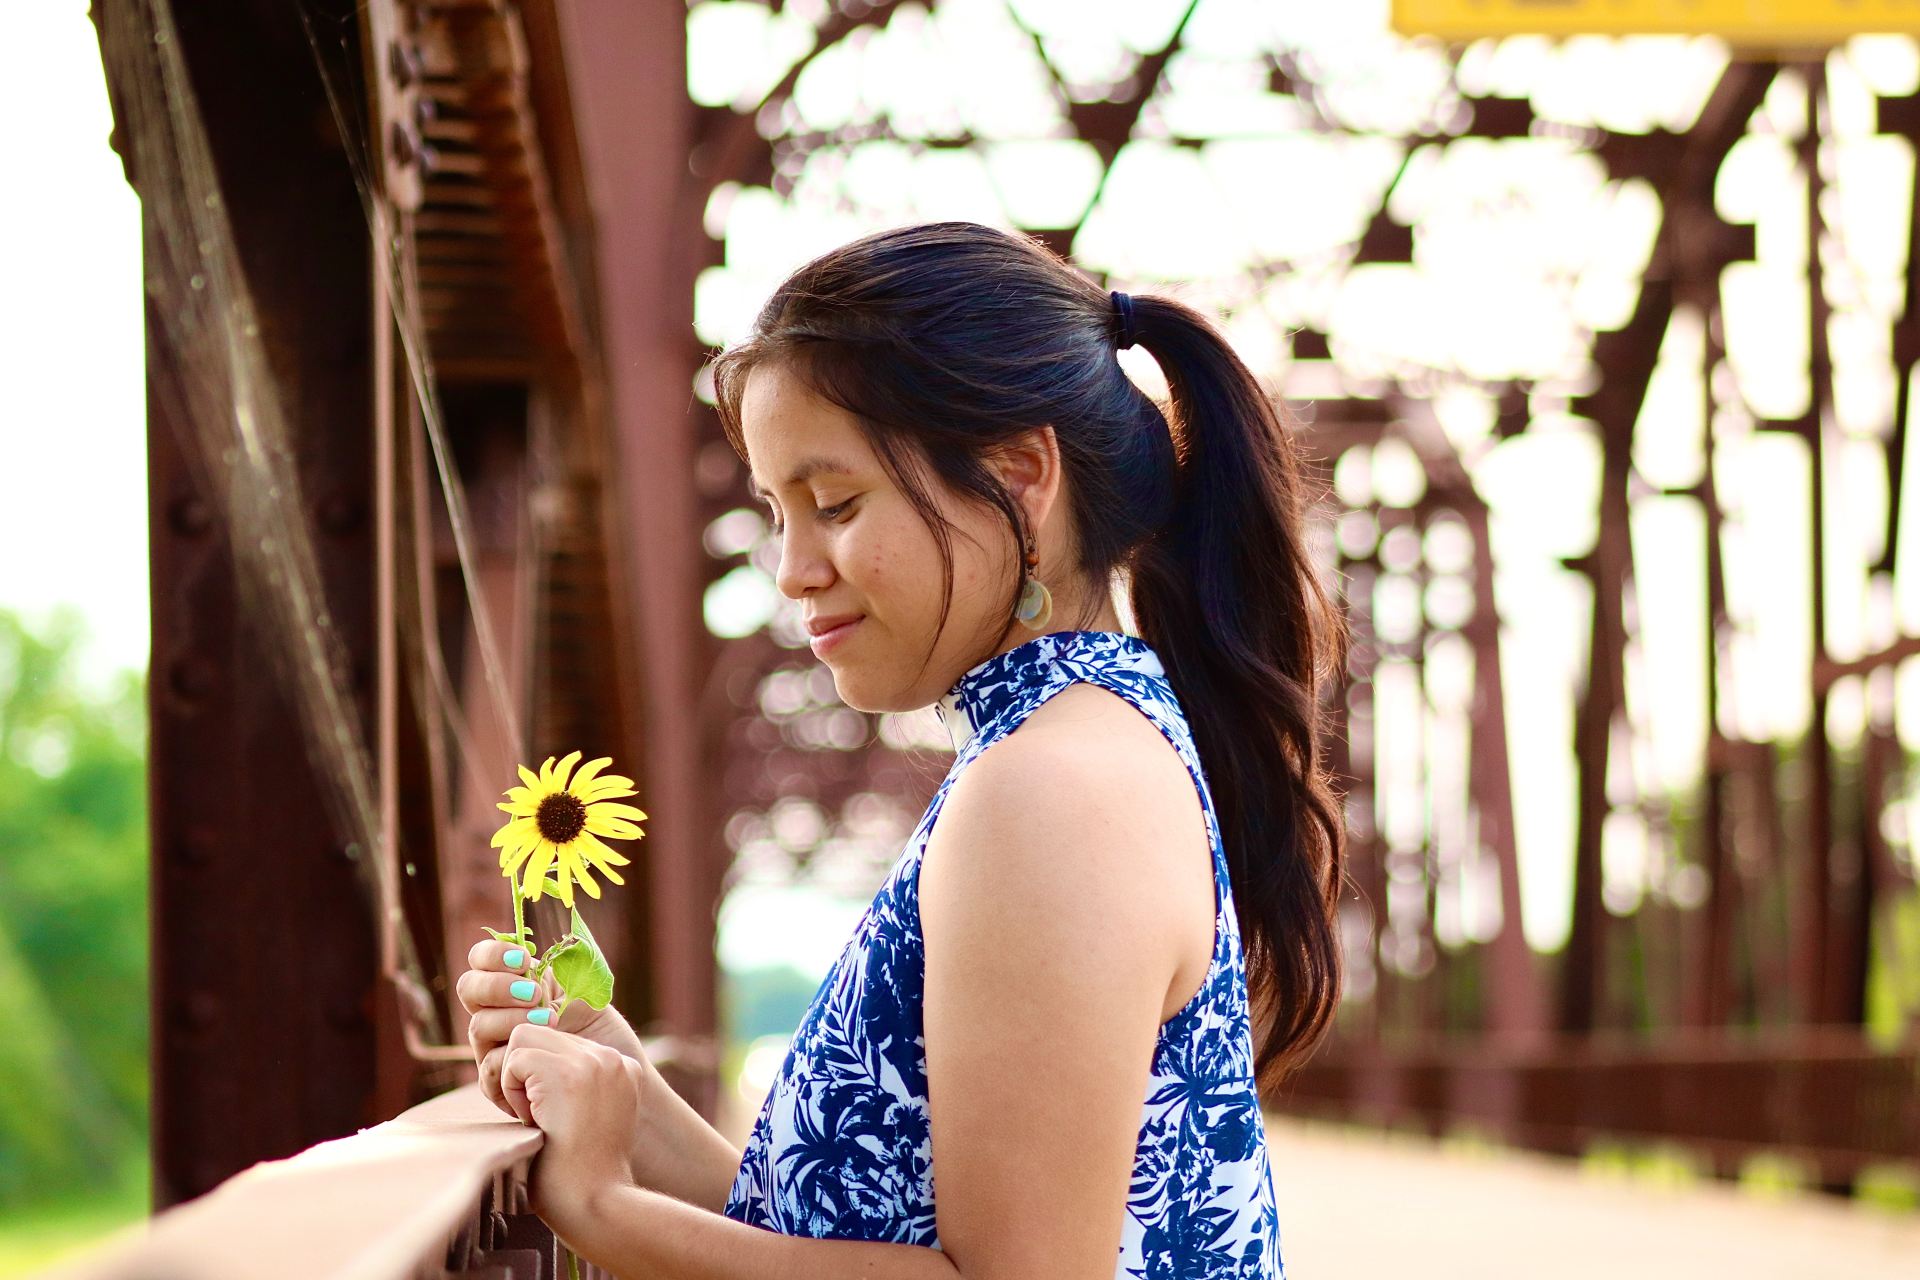 woman in blue and white floral sleeveless dress holding yellow flower during daytime